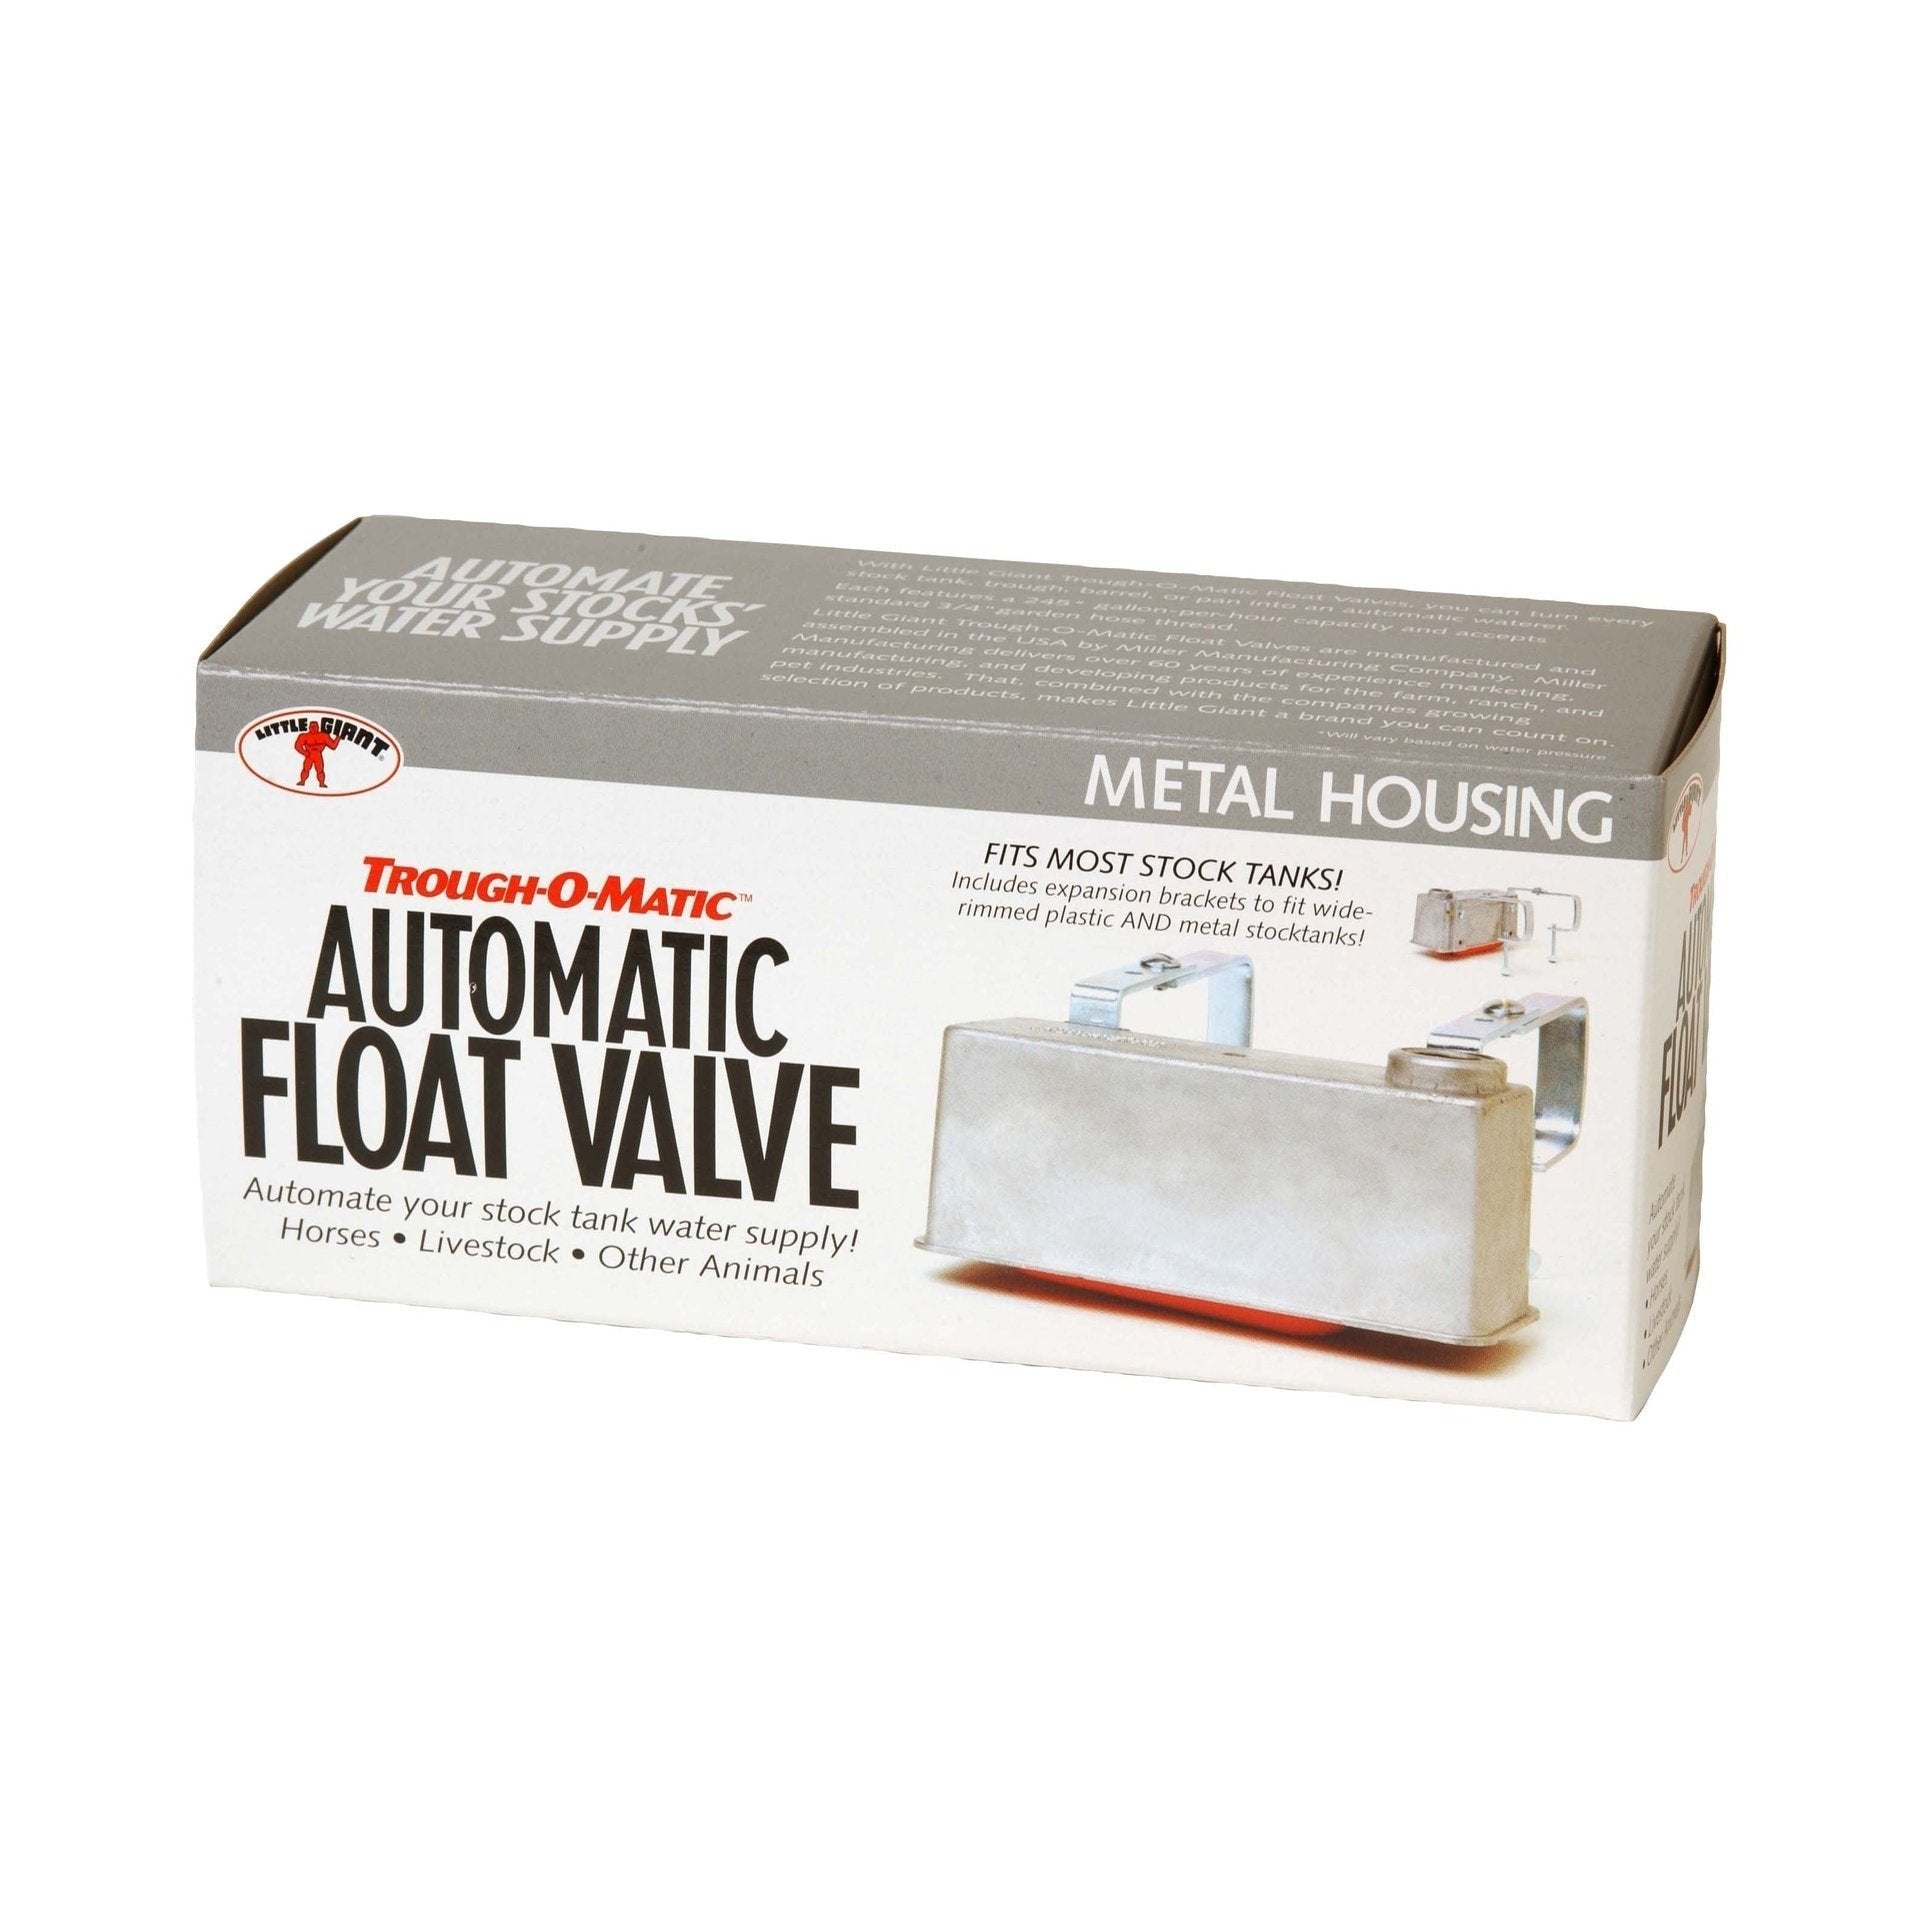 Little Giant - Metal Trough-O-Matic® Float with Expansion Brackets
